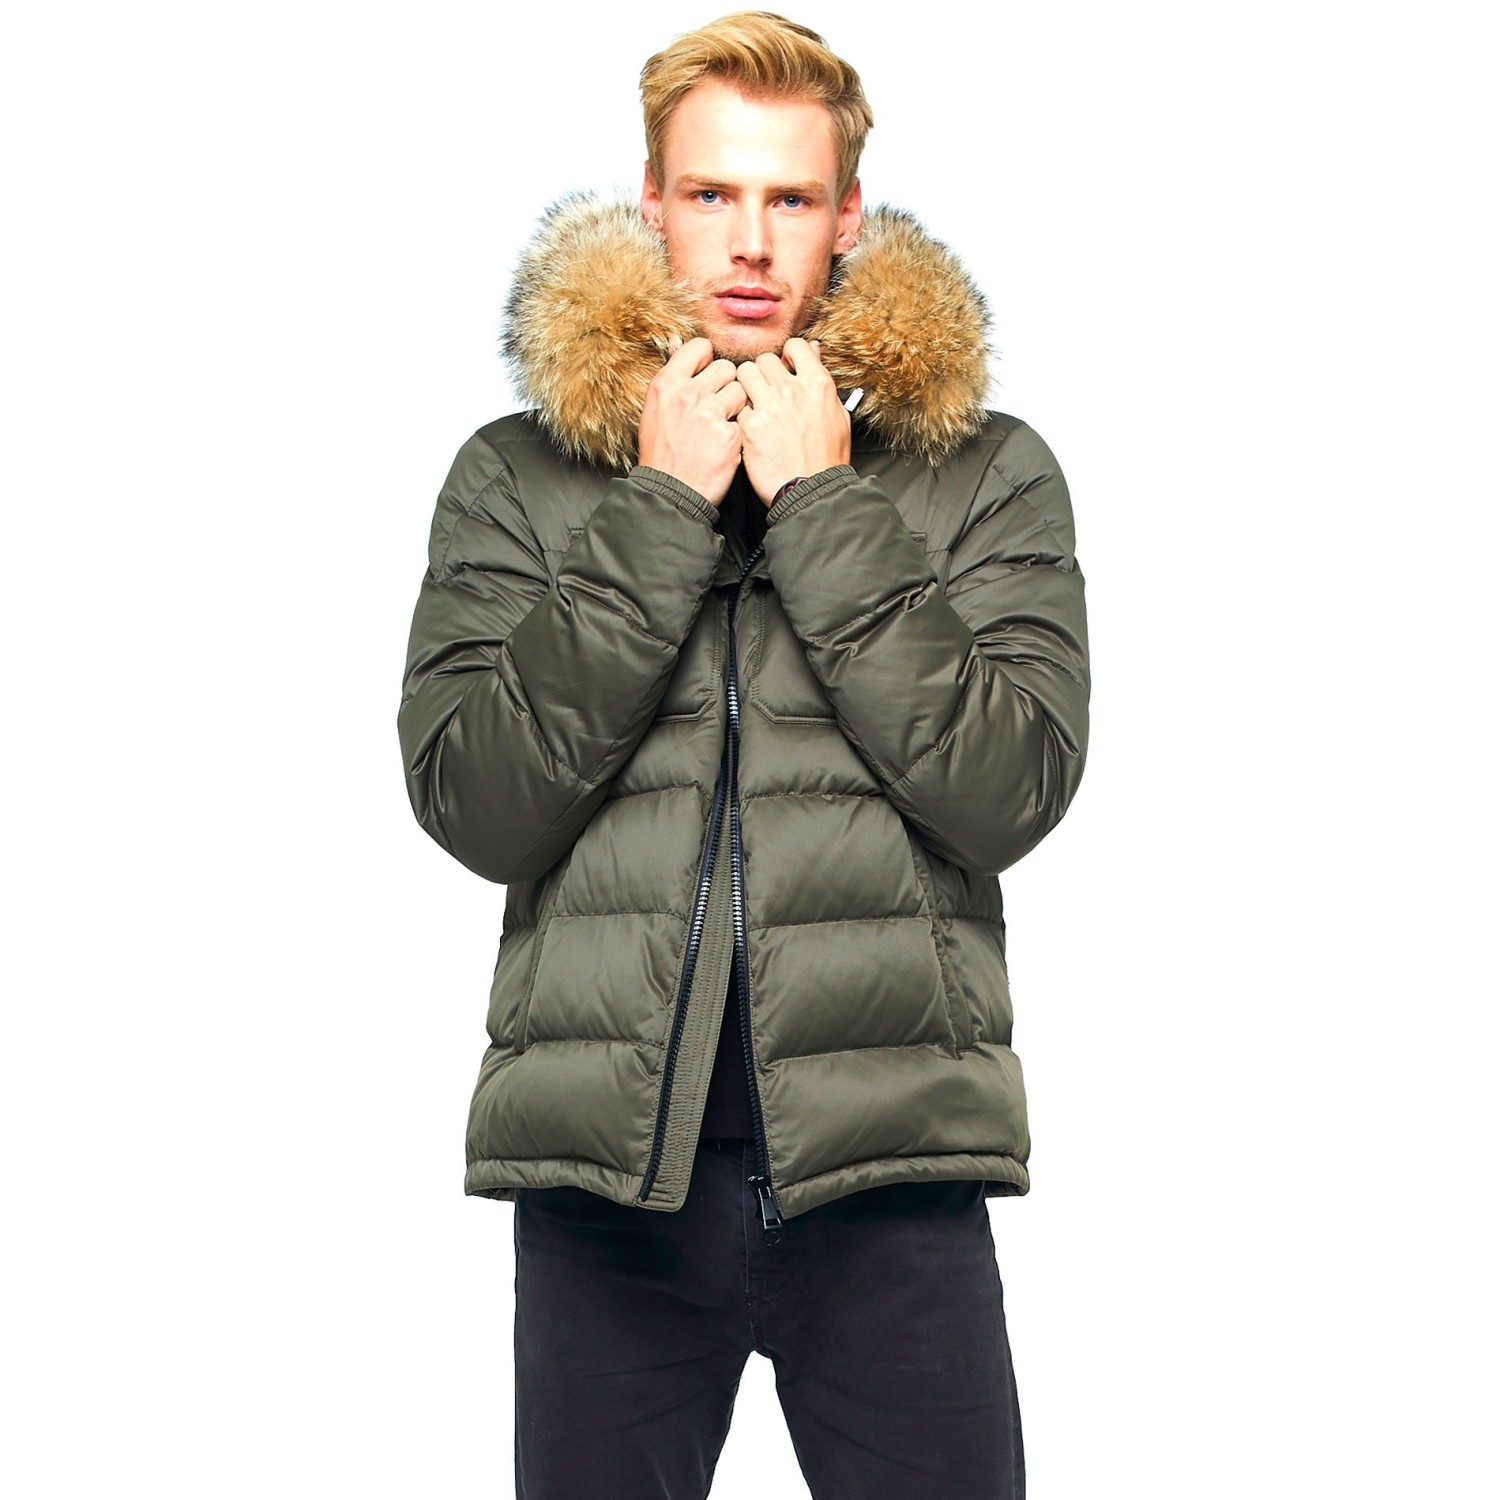 Fubotevic Mens Winter Faux Fur Lined Washed Warm Denim Down Quilted Jacket Coat Outerwear